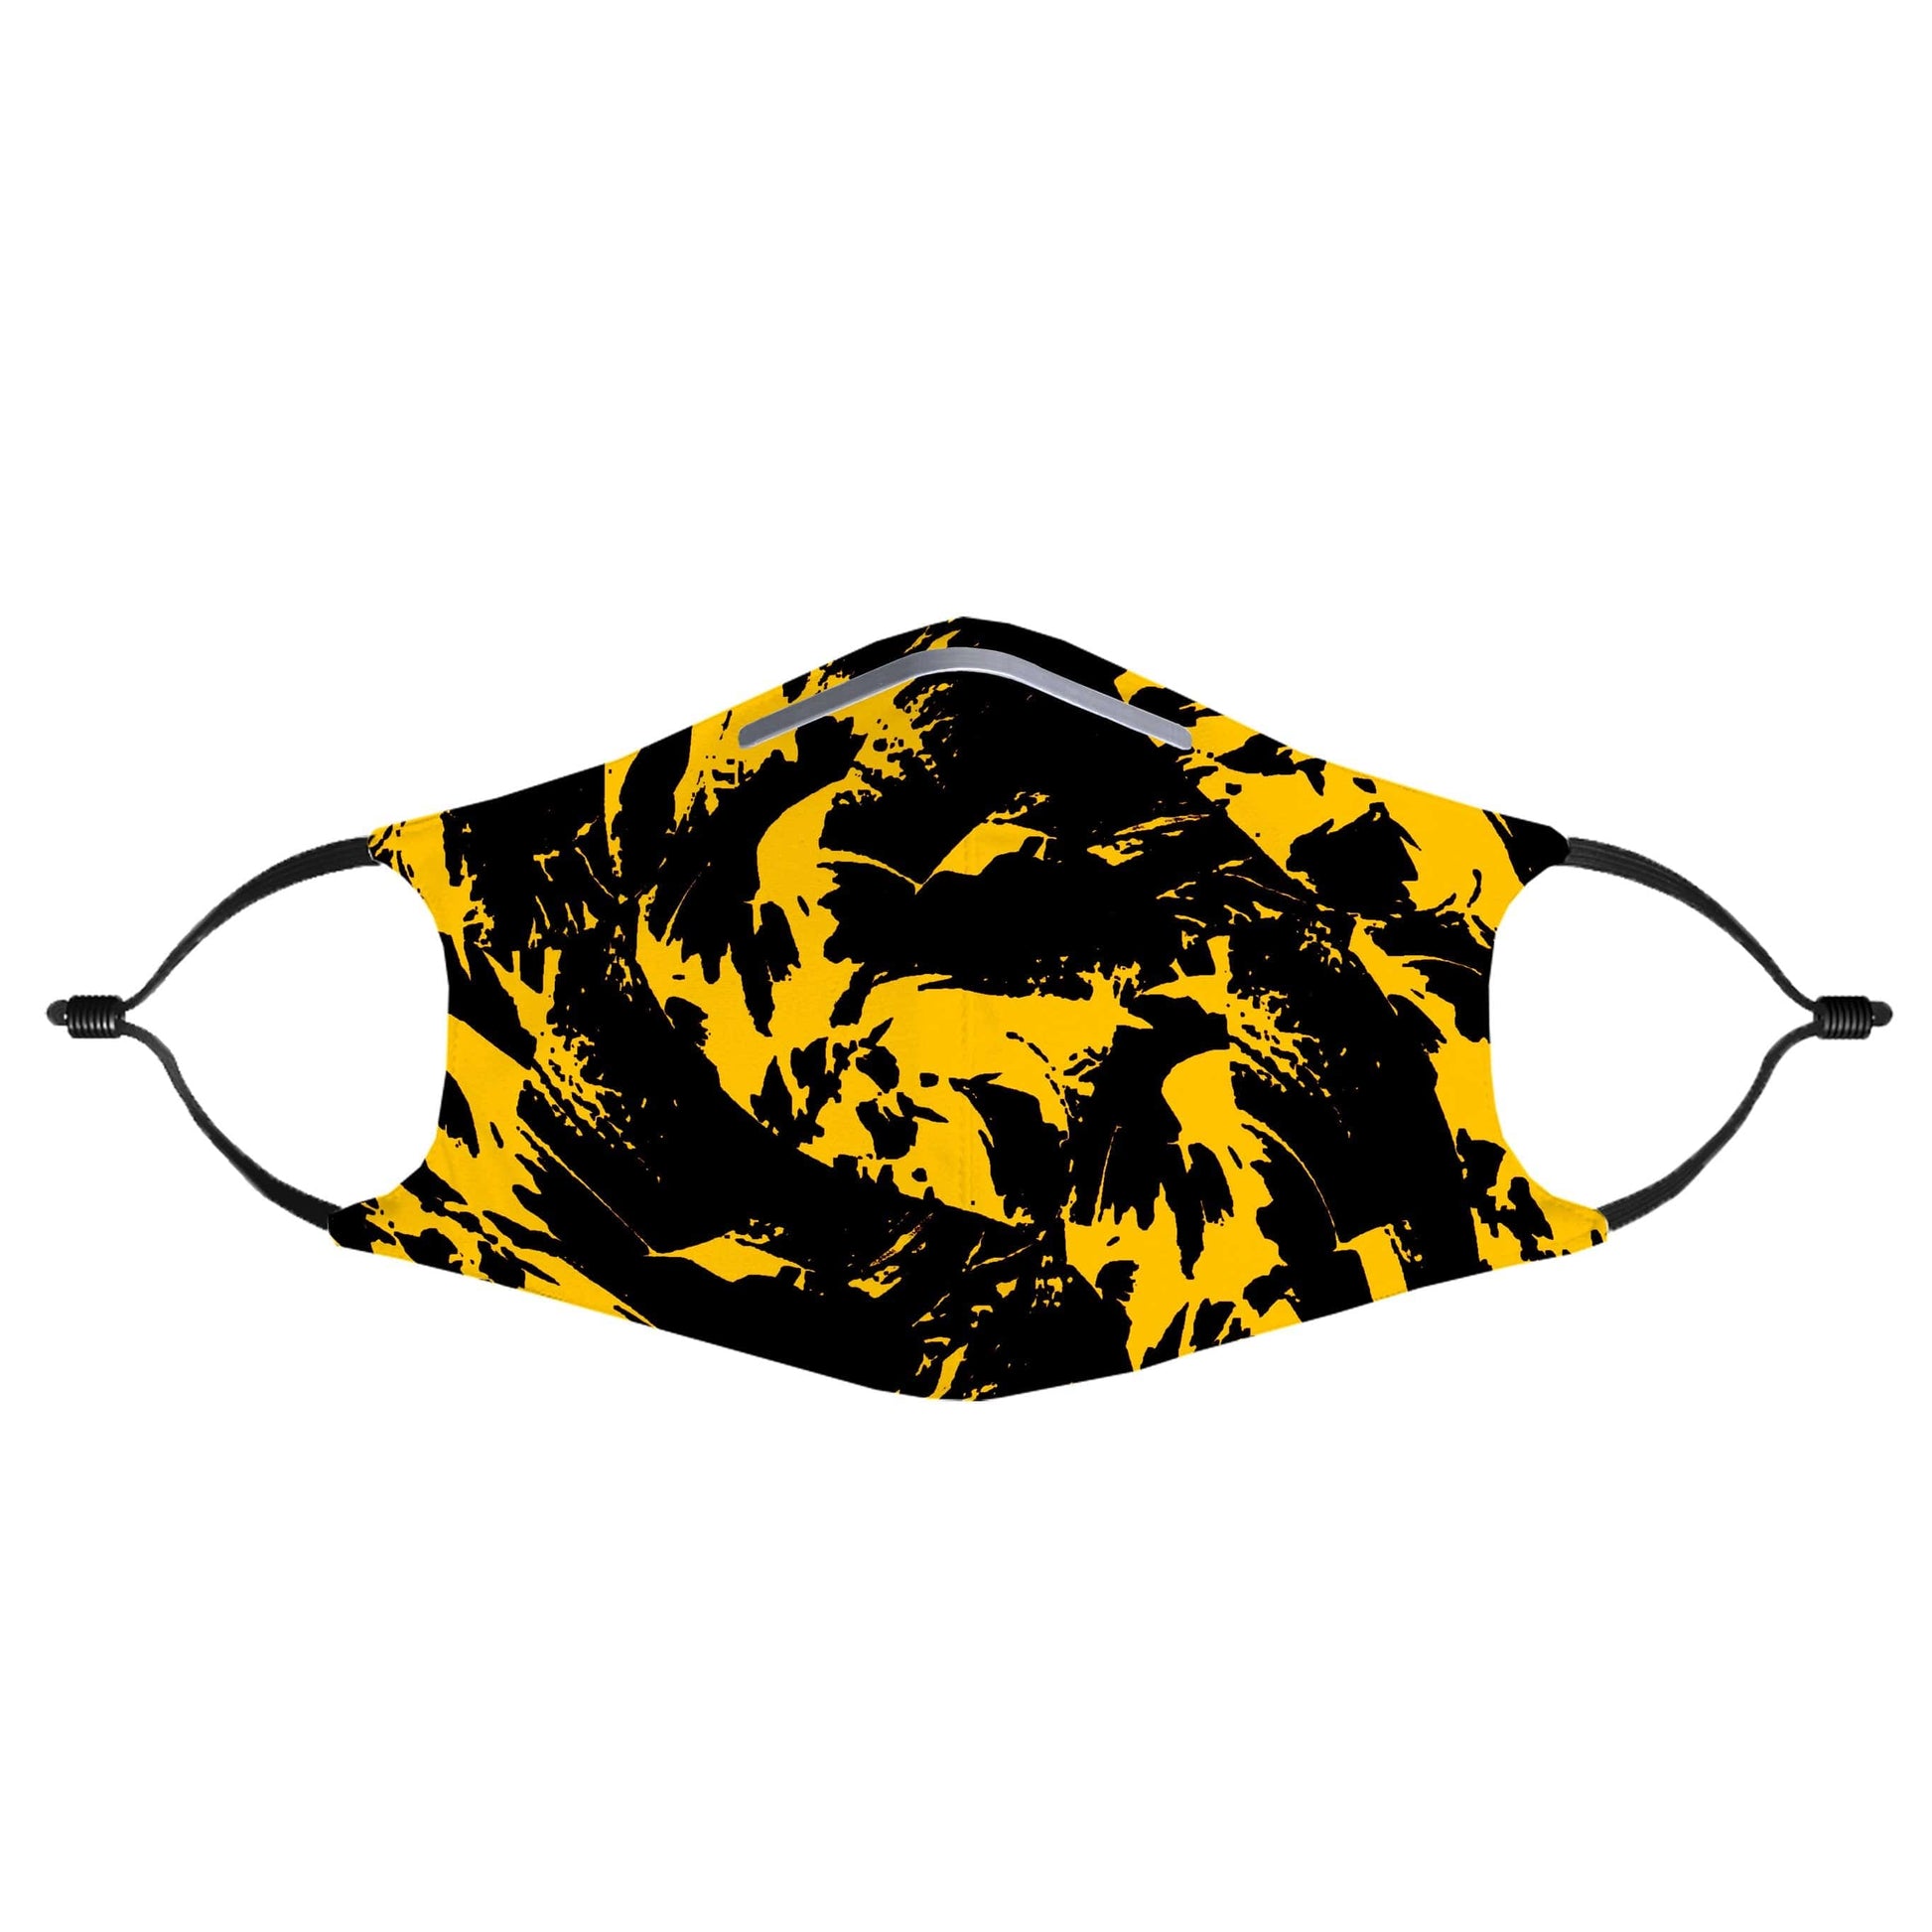 Black and Yellow Paint Splatter Hoodie and Joggers with PM 2.5 Face Mask Combo, Big Tex Funkadelic, | iEDM